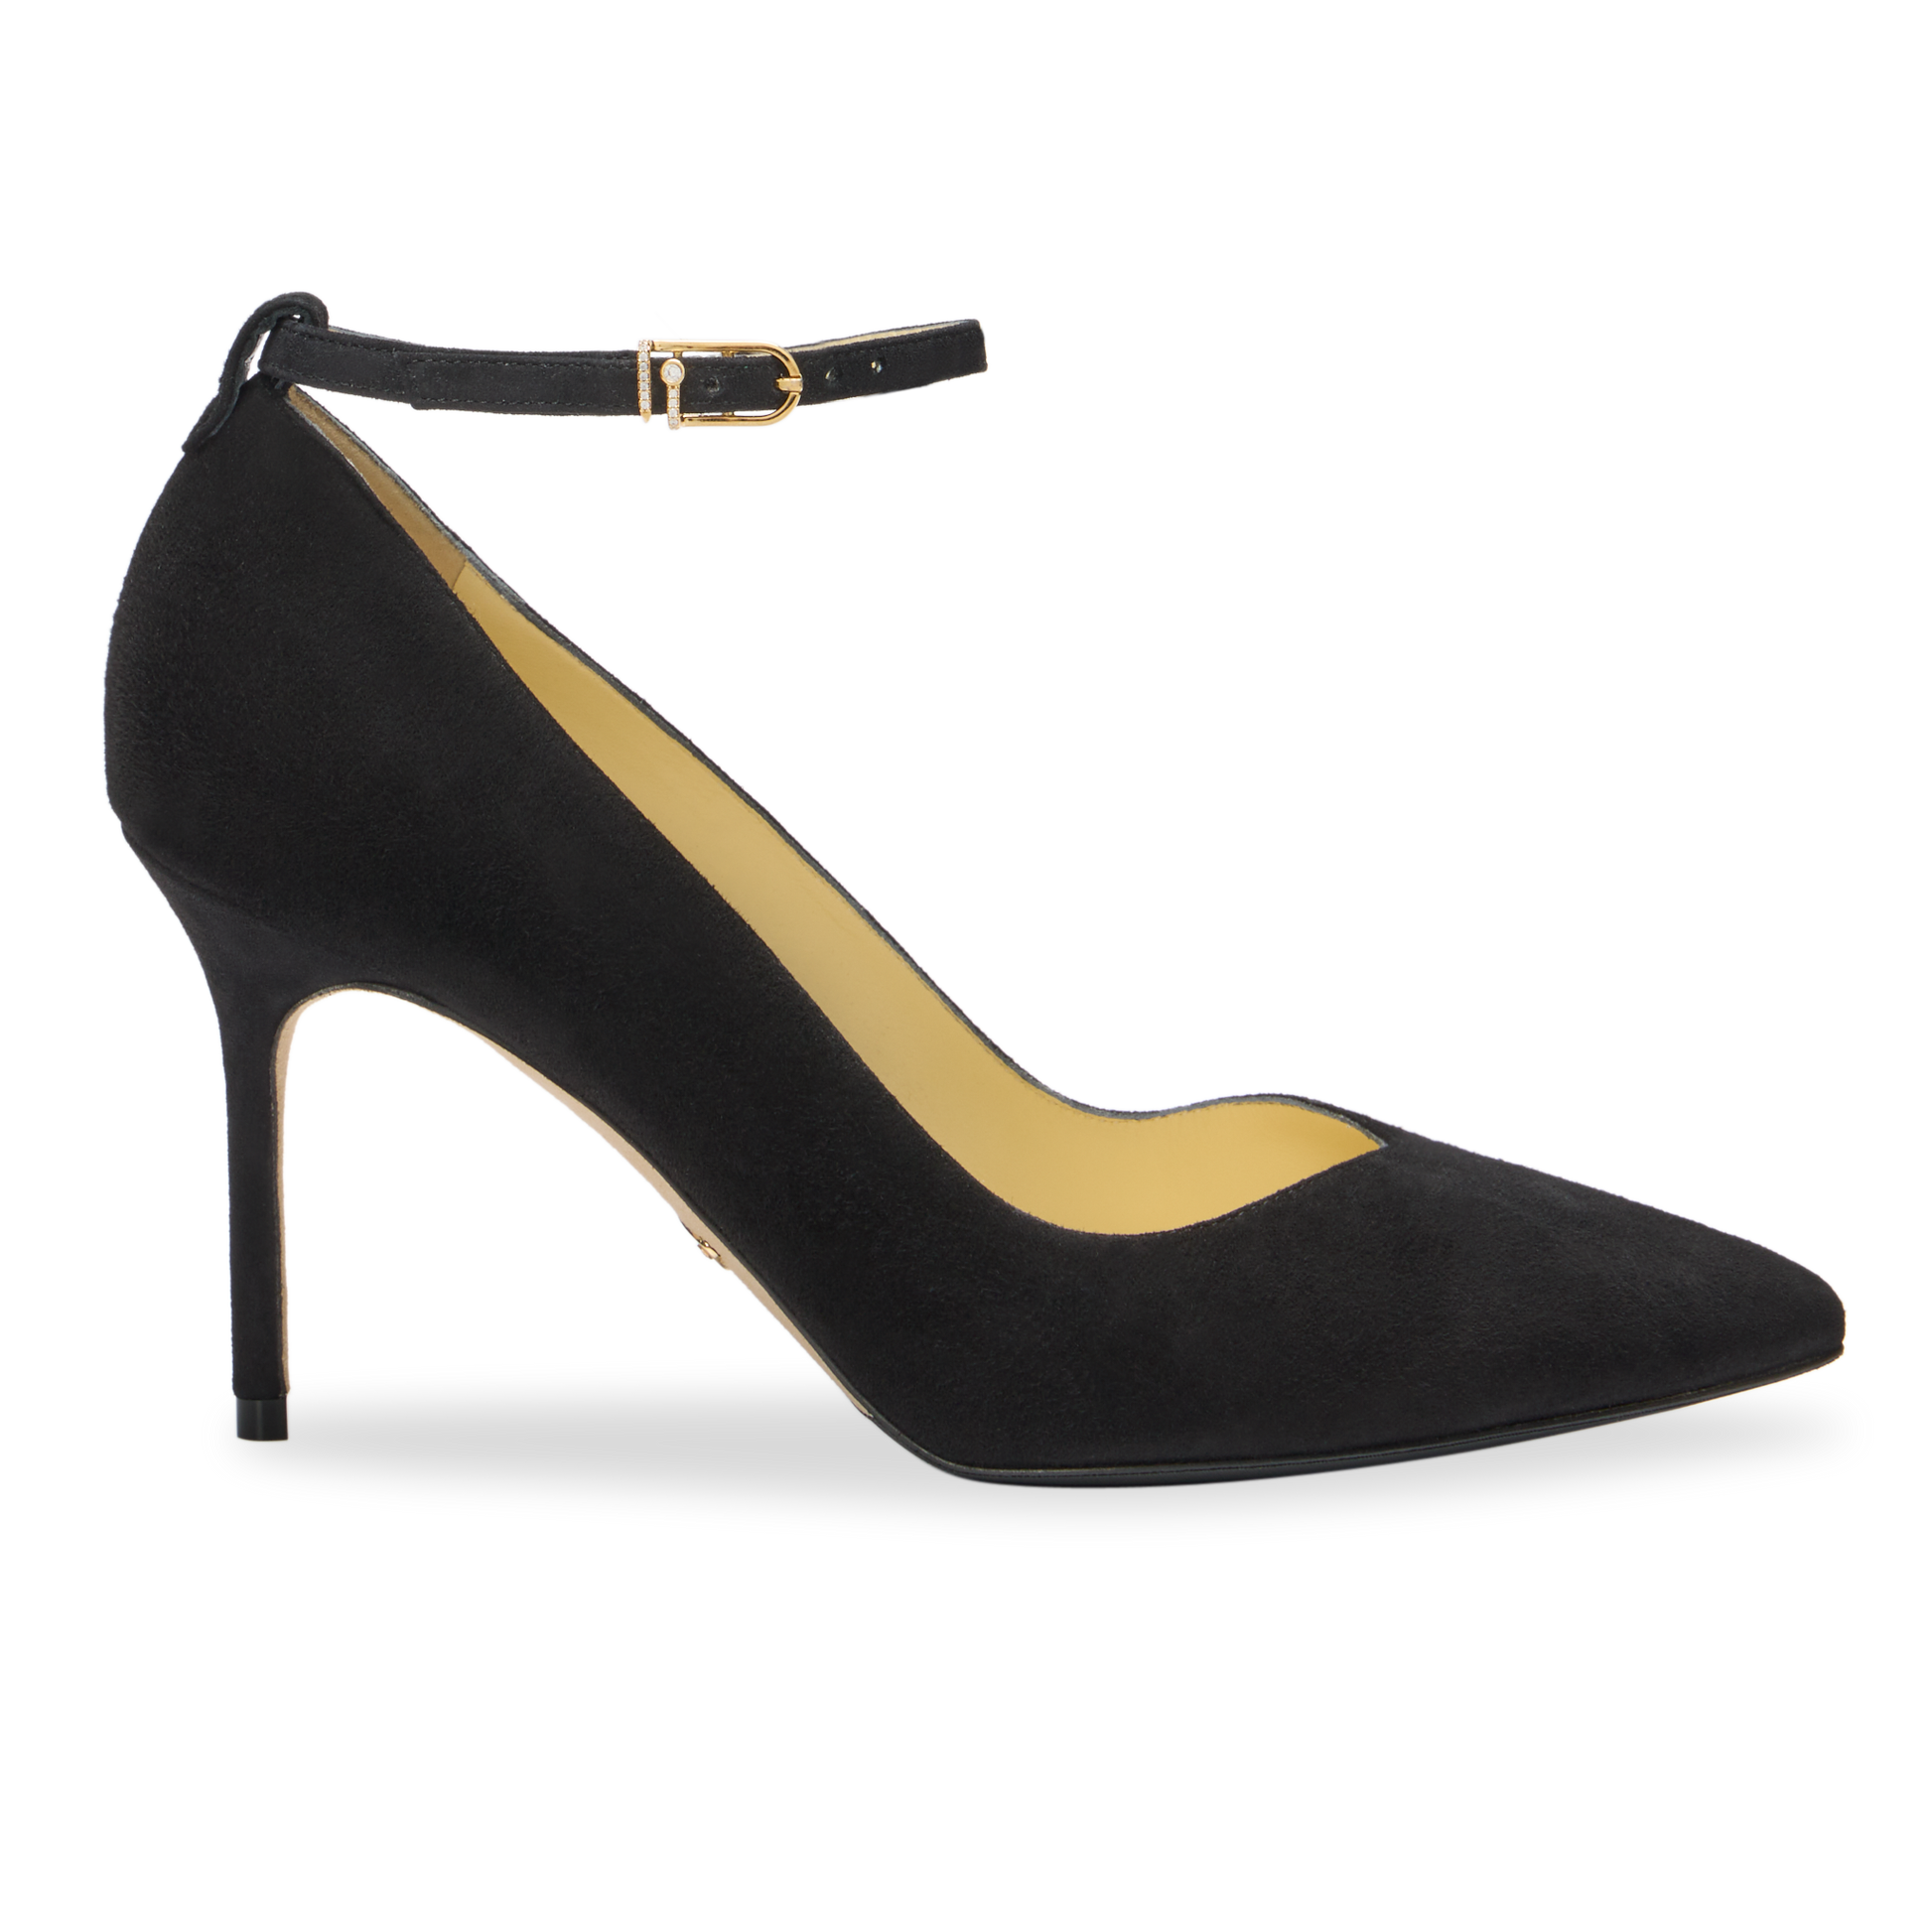  Carcuume Slingback Heels for Women,Two Tone Shoes,Sexy